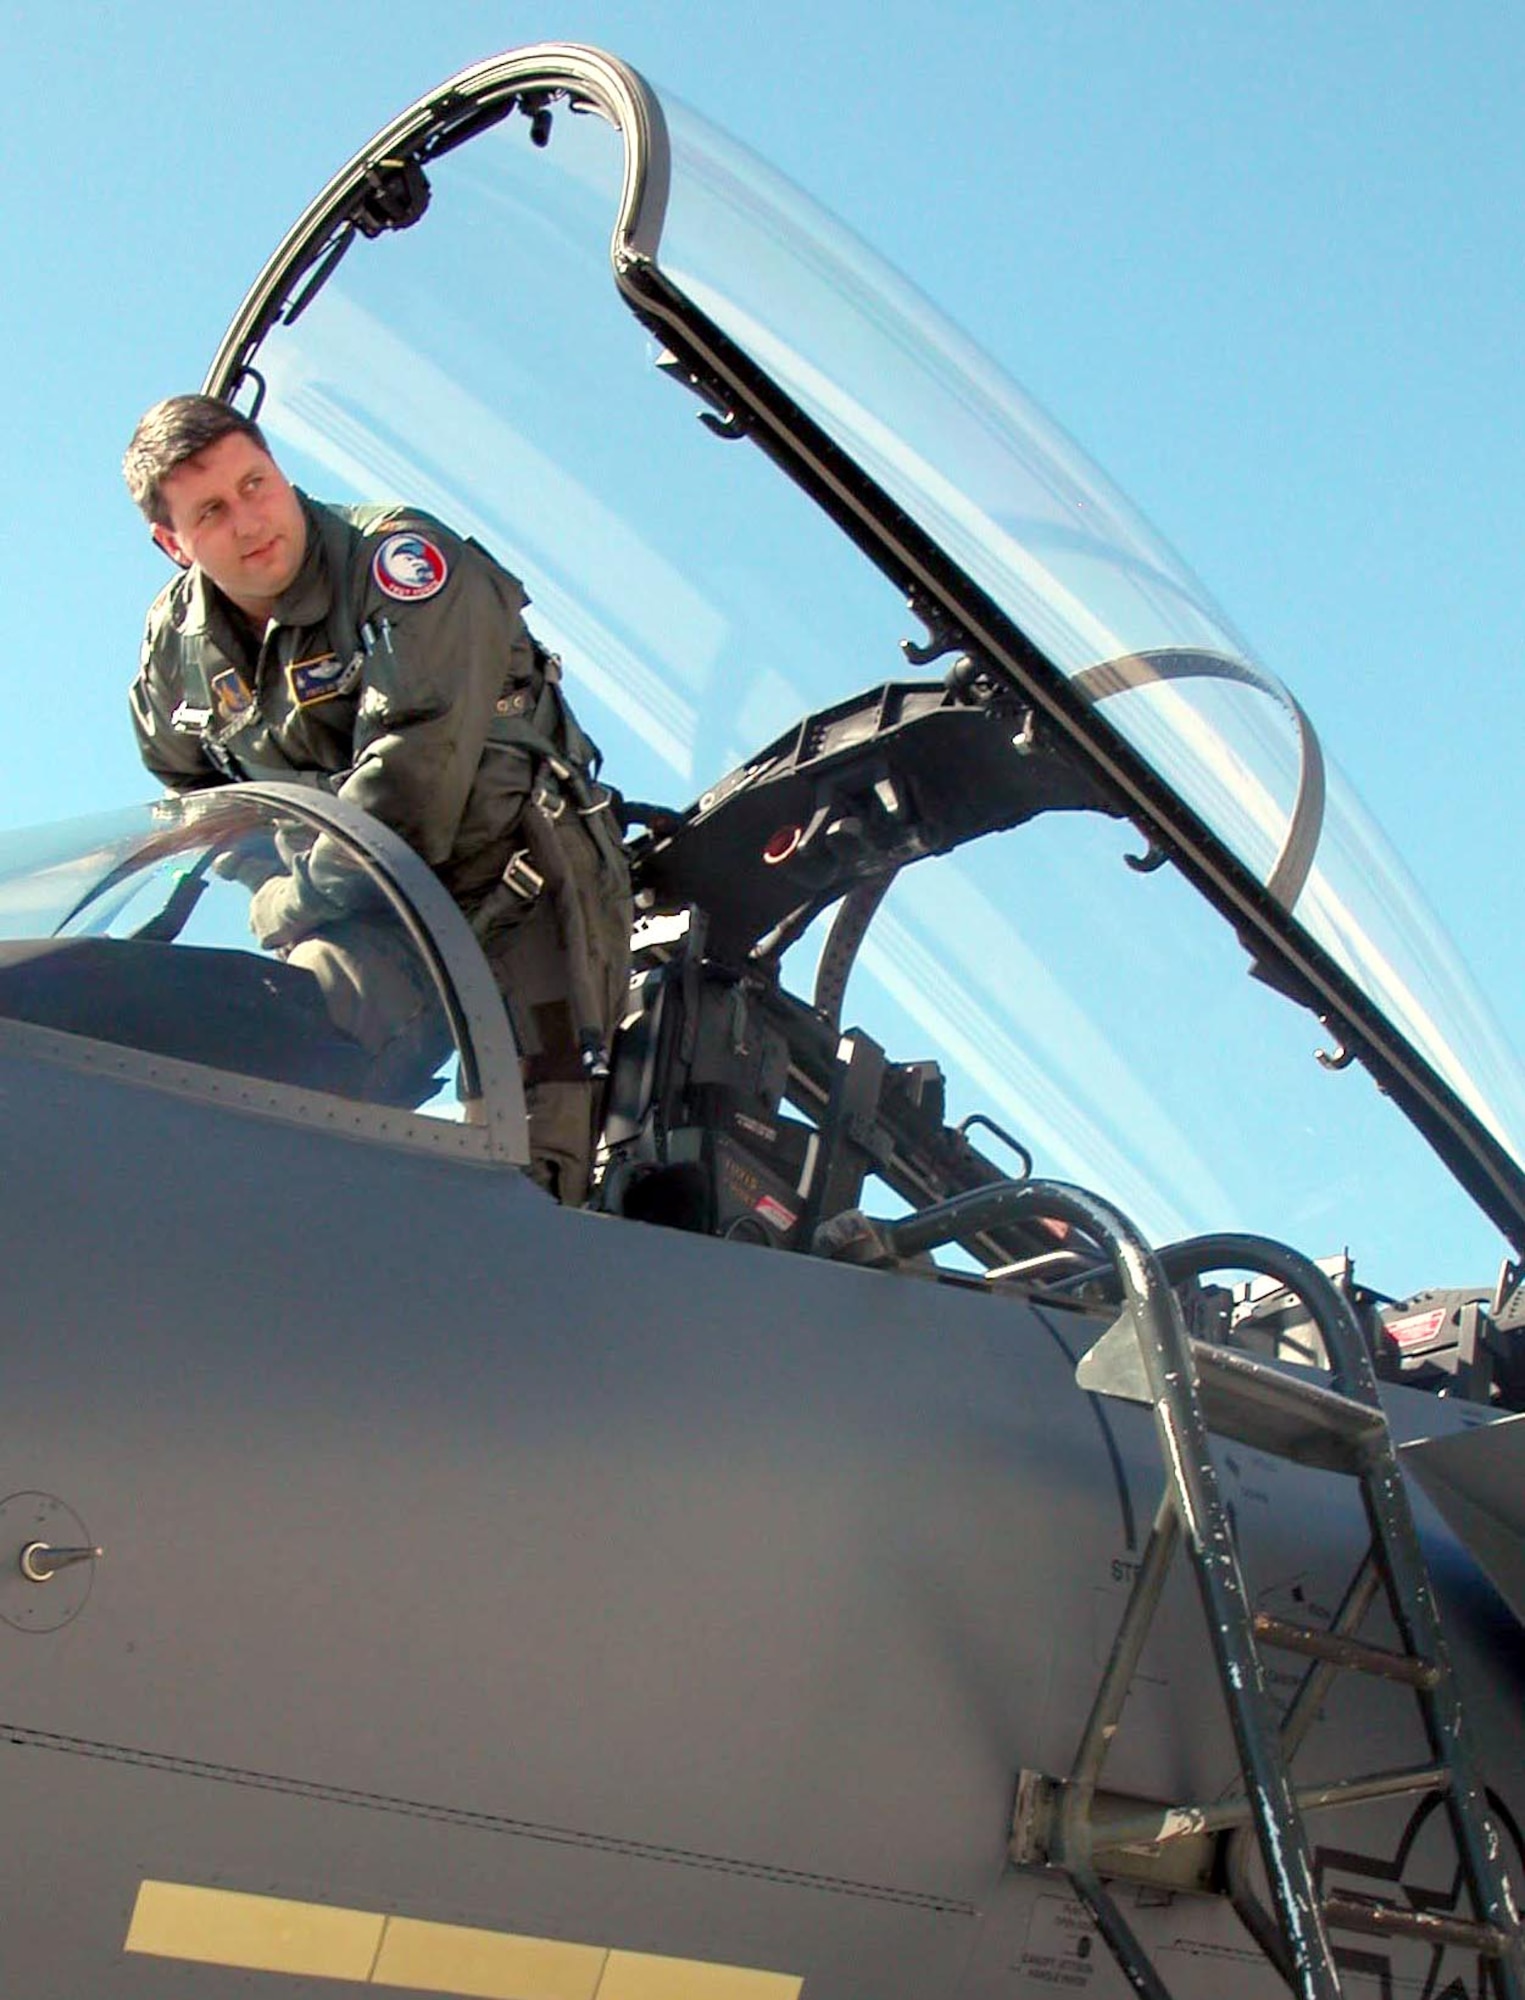 ROBINS AIR FORCE BASE, Ga. -- Maj. Fritz Heck, 339th Flight Test Squadron, exits an F-15 Eagle.  He praised the craftsmanship of the F-15 canopy shop here, which repairs flaws in F-15 canopies and windscreens.  (U.S. Air Force photo by Sue Sapp)
